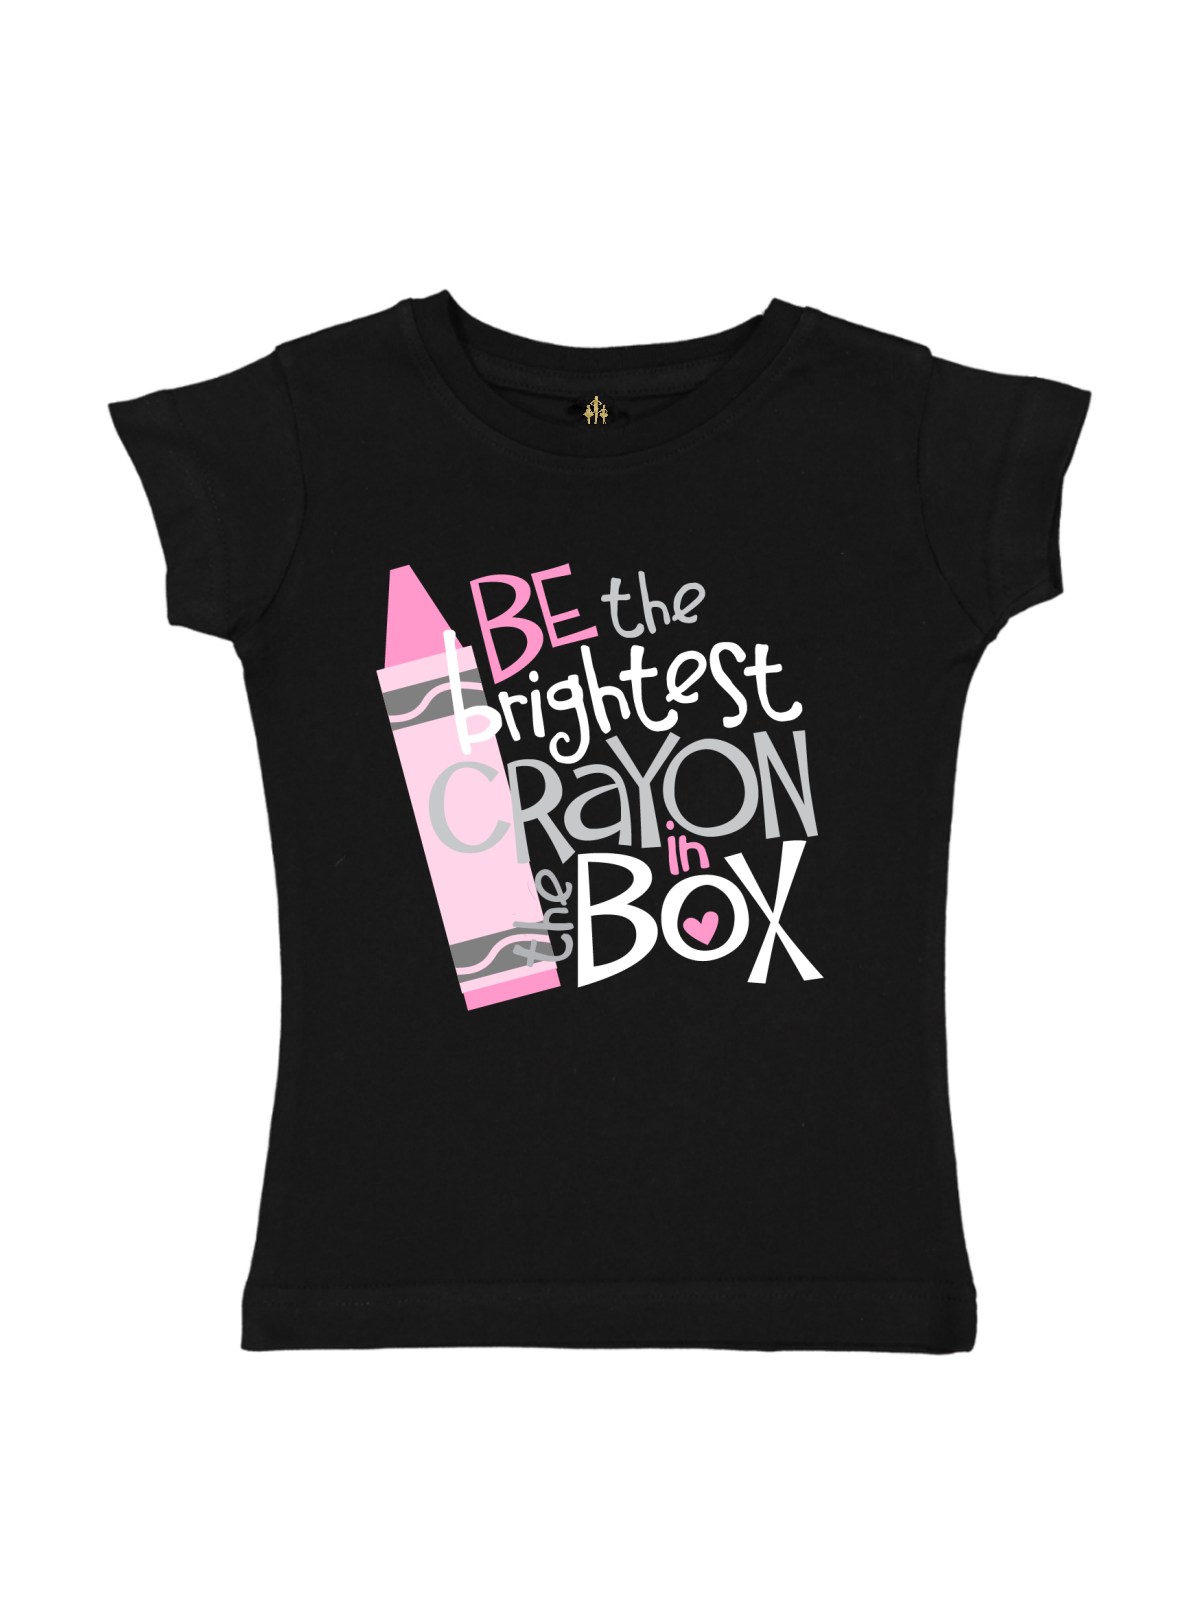 Be the Brightest Crayon in the Box Girls Back to School Shirt